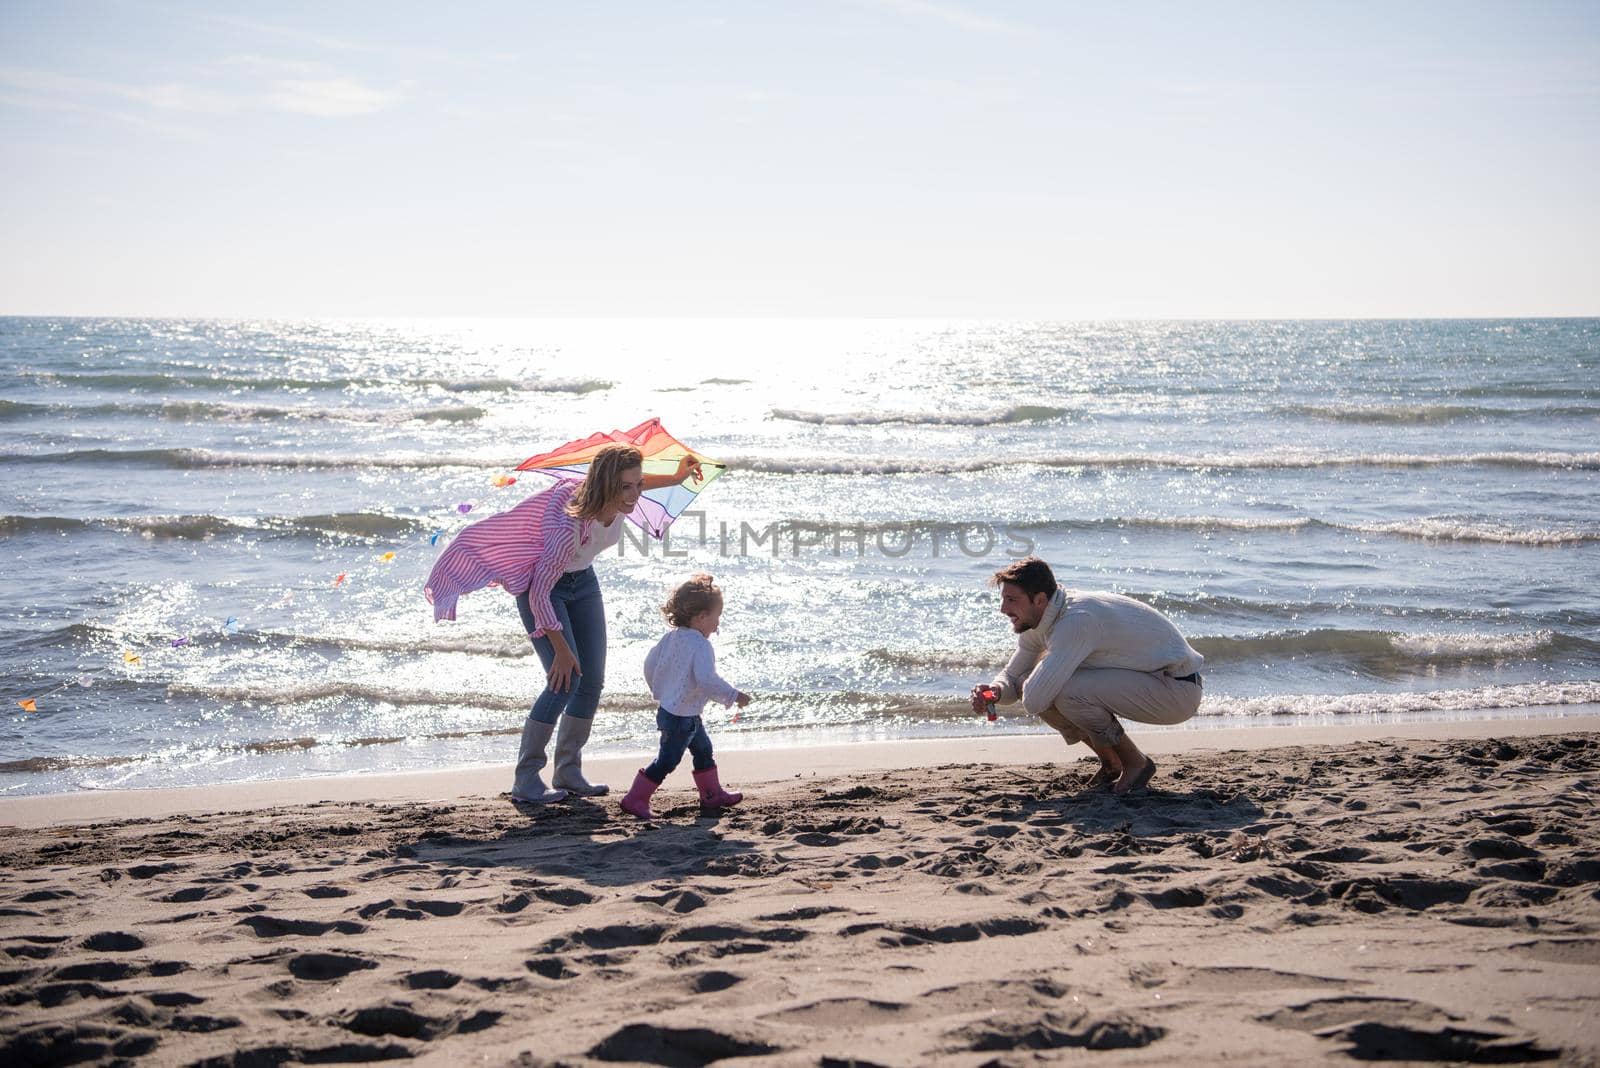 young family with kids resting and having fun with a kite at beach during autumn day